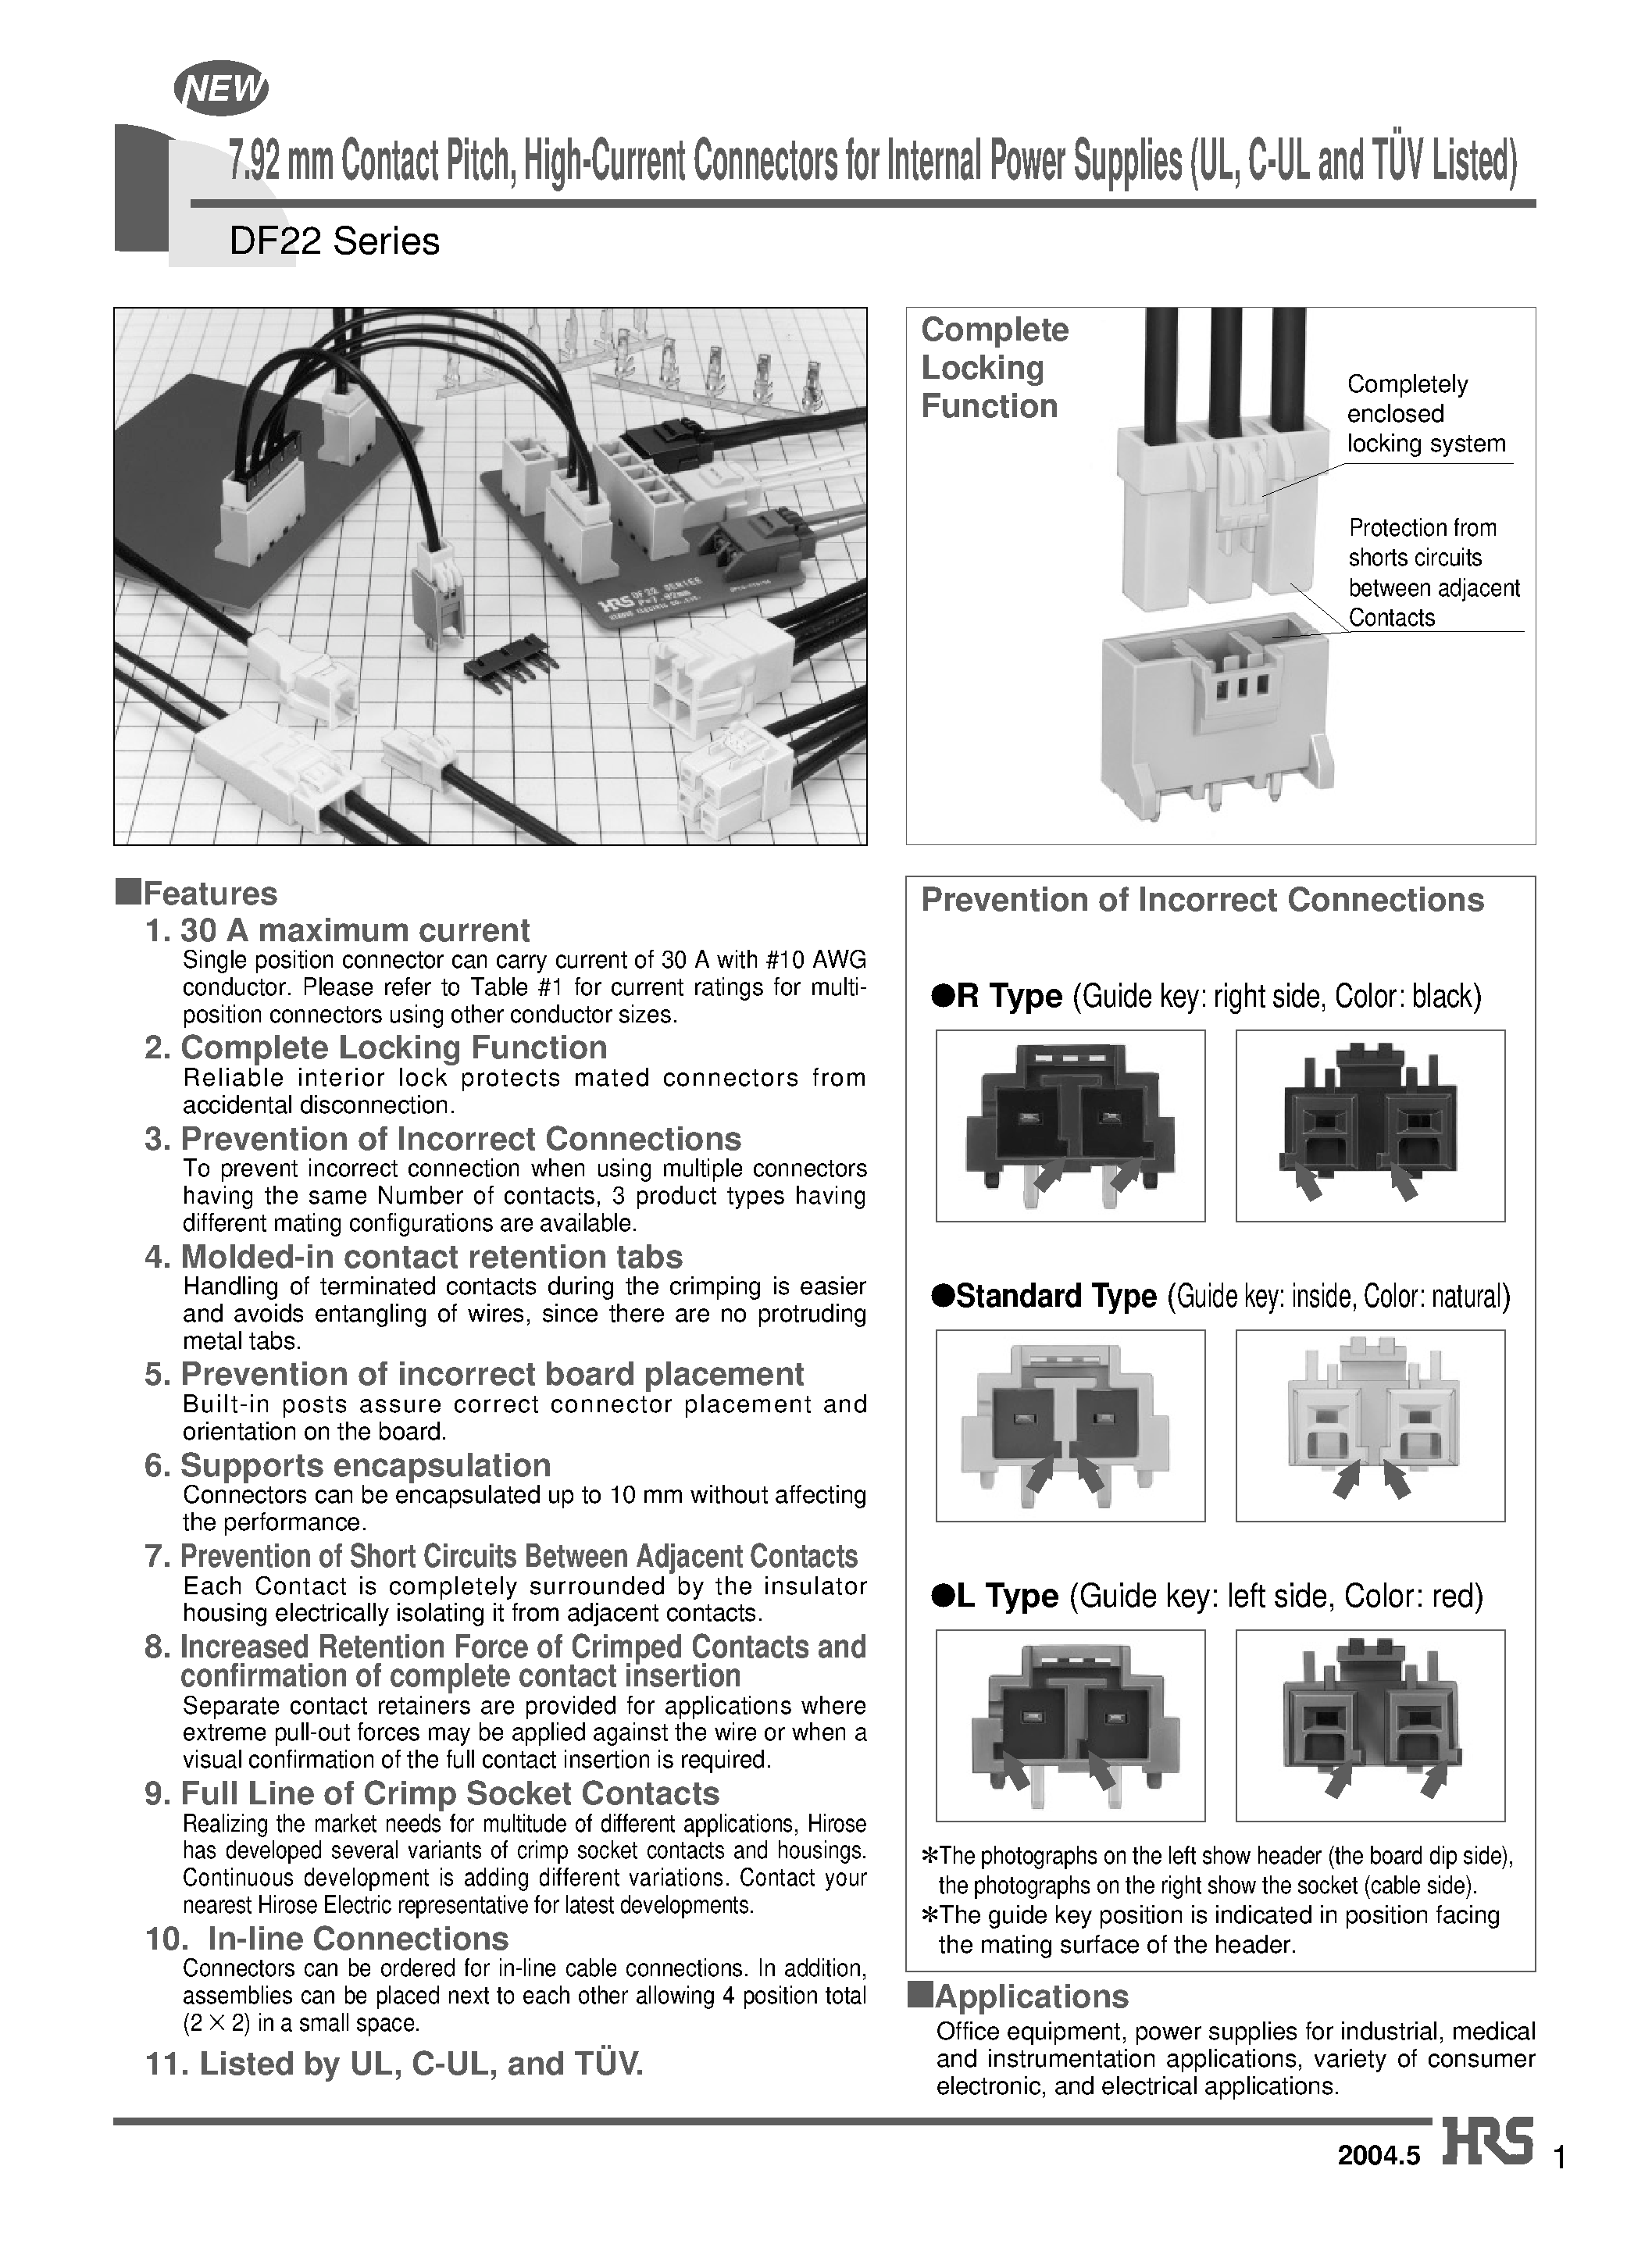 Datasheet DF22-1DEP-7.92C - 7.92 mm Contact Pitch/ High-Current Connectors for Internal Power Supplies (UL/ C-UL and TUV Listed) page 1